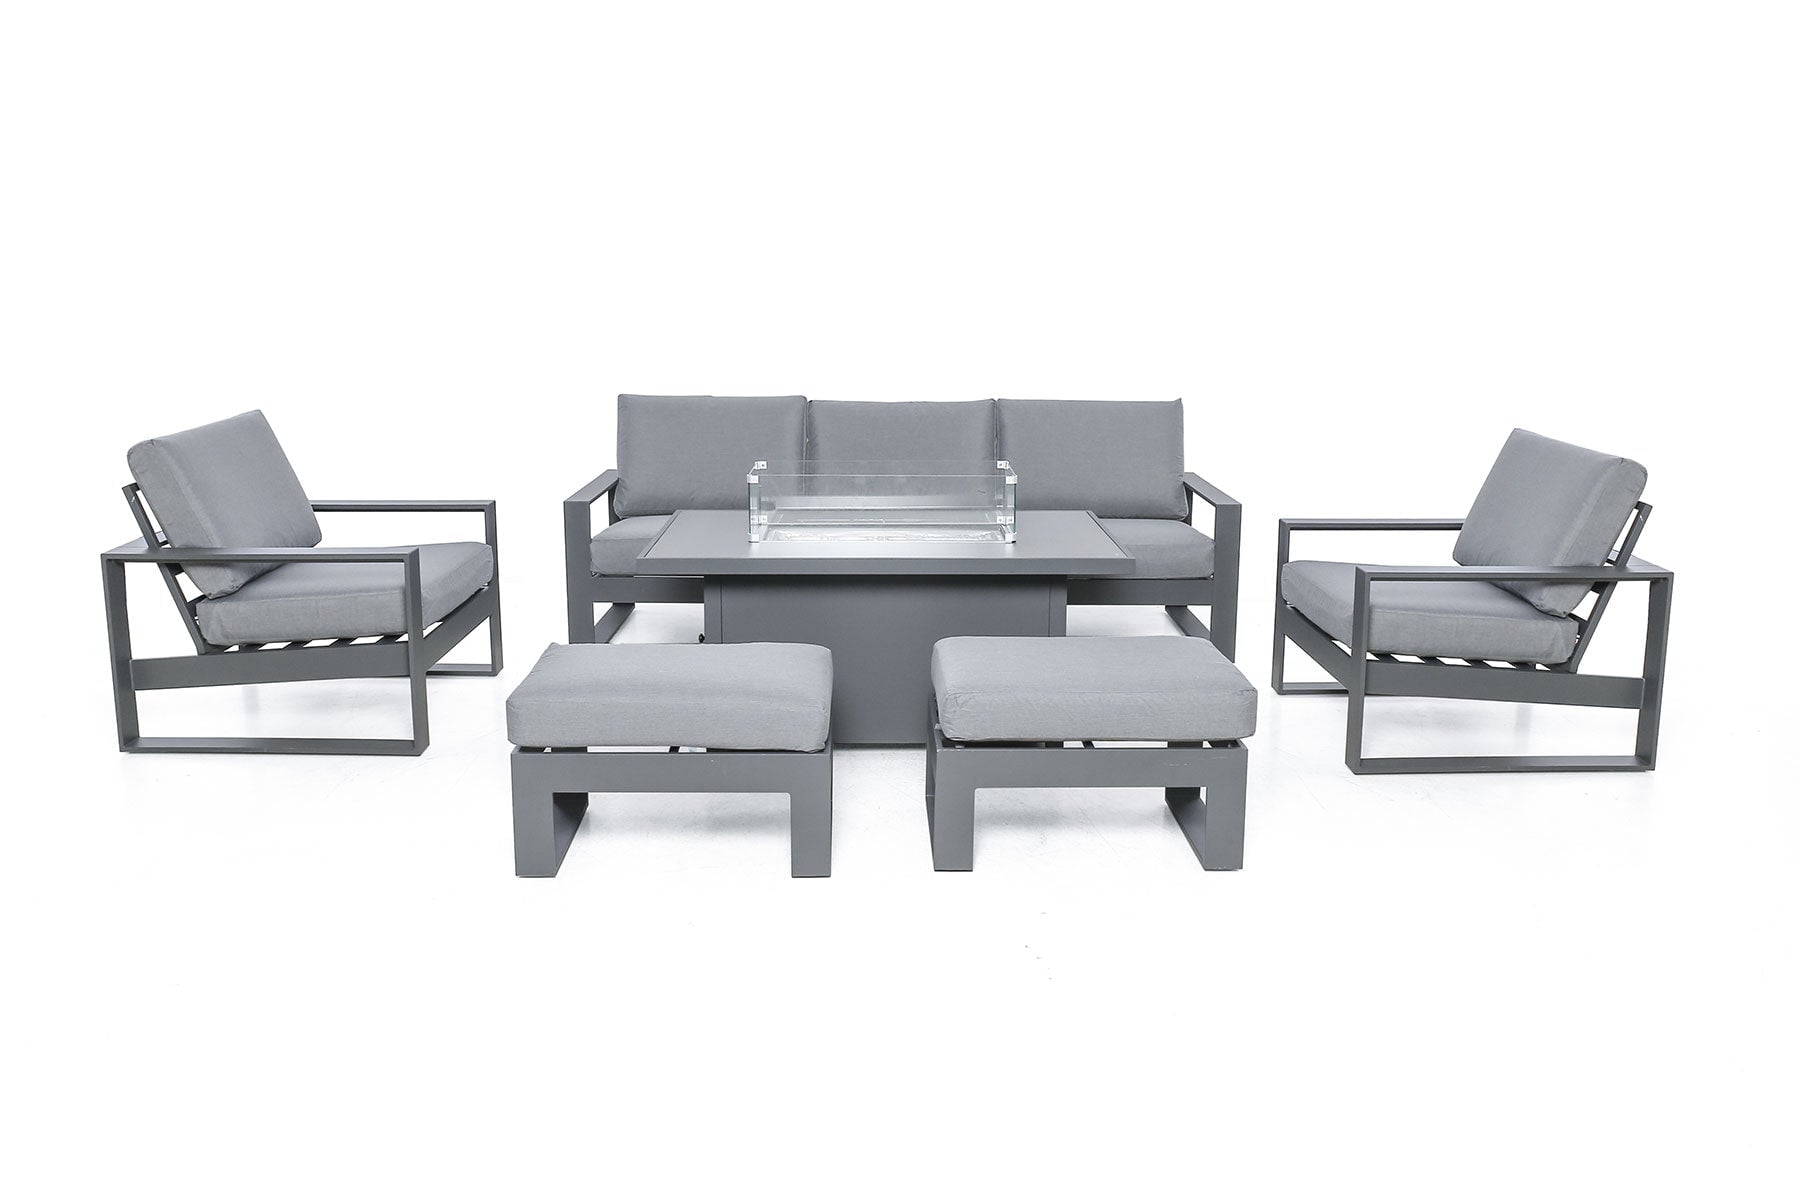 Amalfi 3 Seat Sofa Dining Set with Rectangular Fire Pit Coffee Table
(includes x2 footstools) | Grey